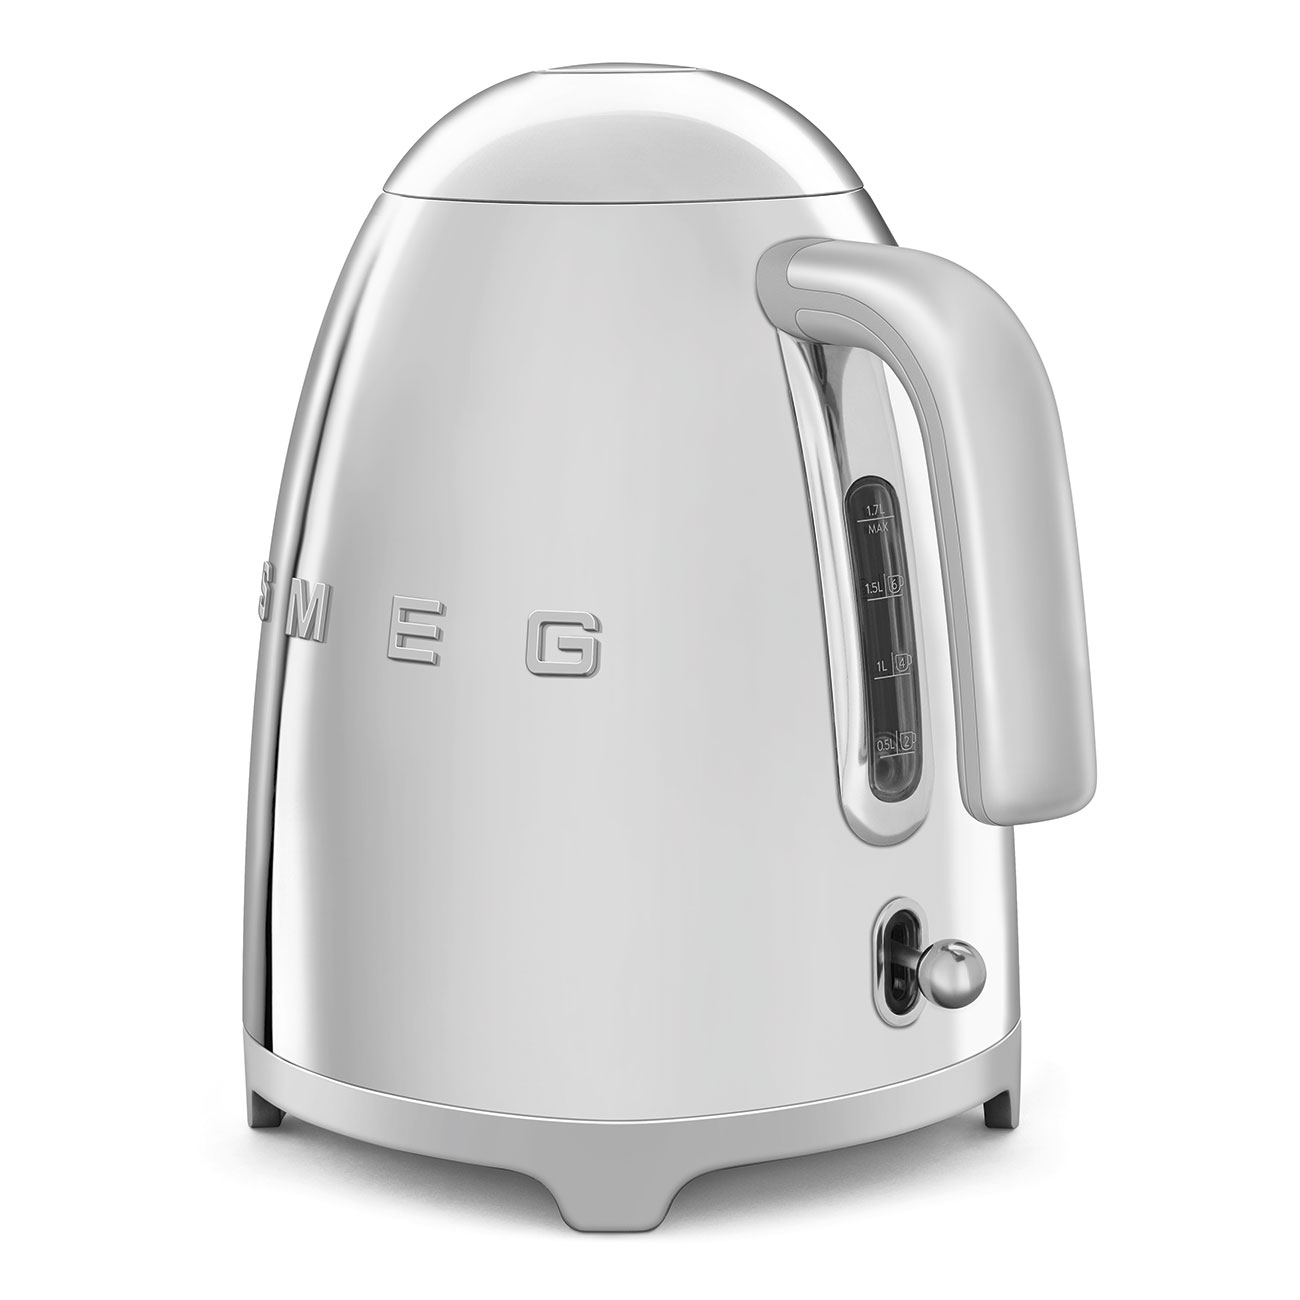 Electric kettle Retro-style KLF03SSUS